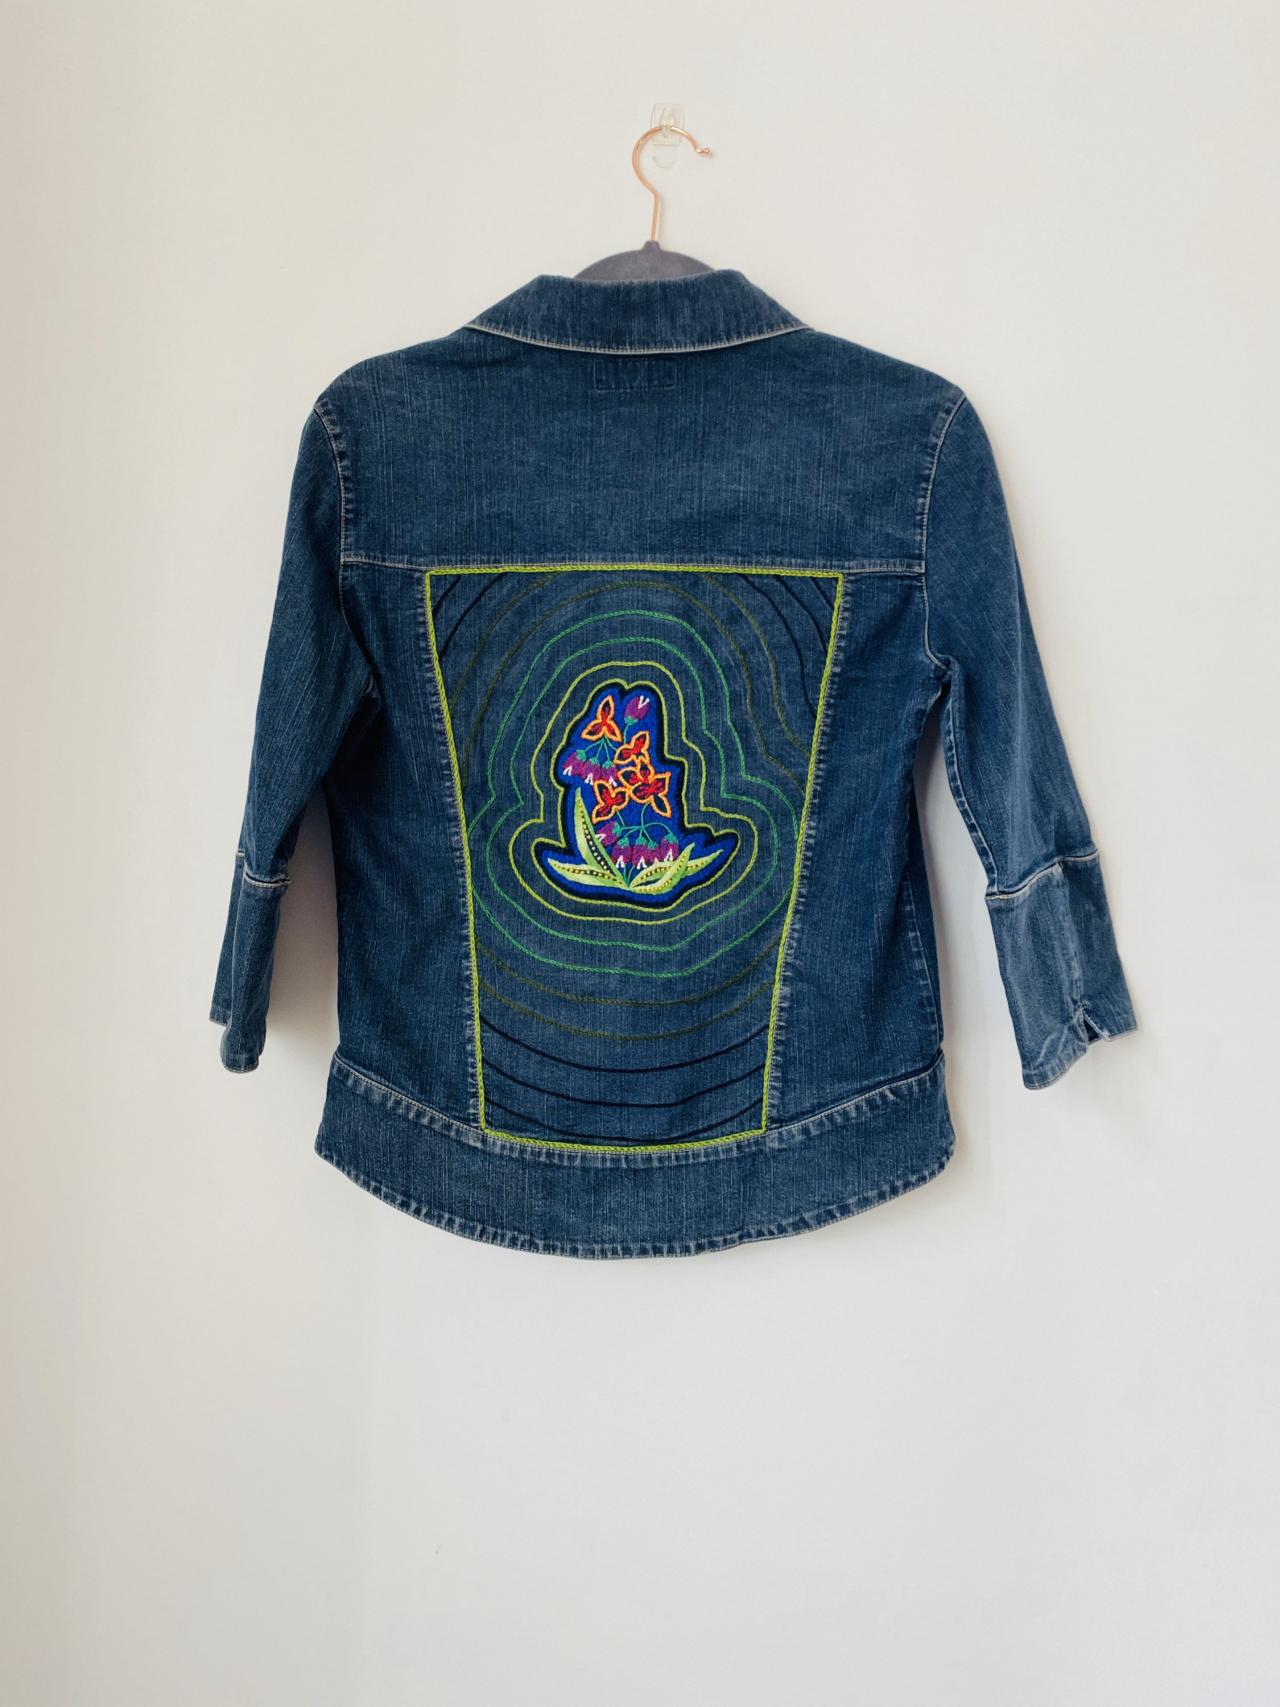 Upcycled hand embroidered hand appliquéd patch denim jacket size S .